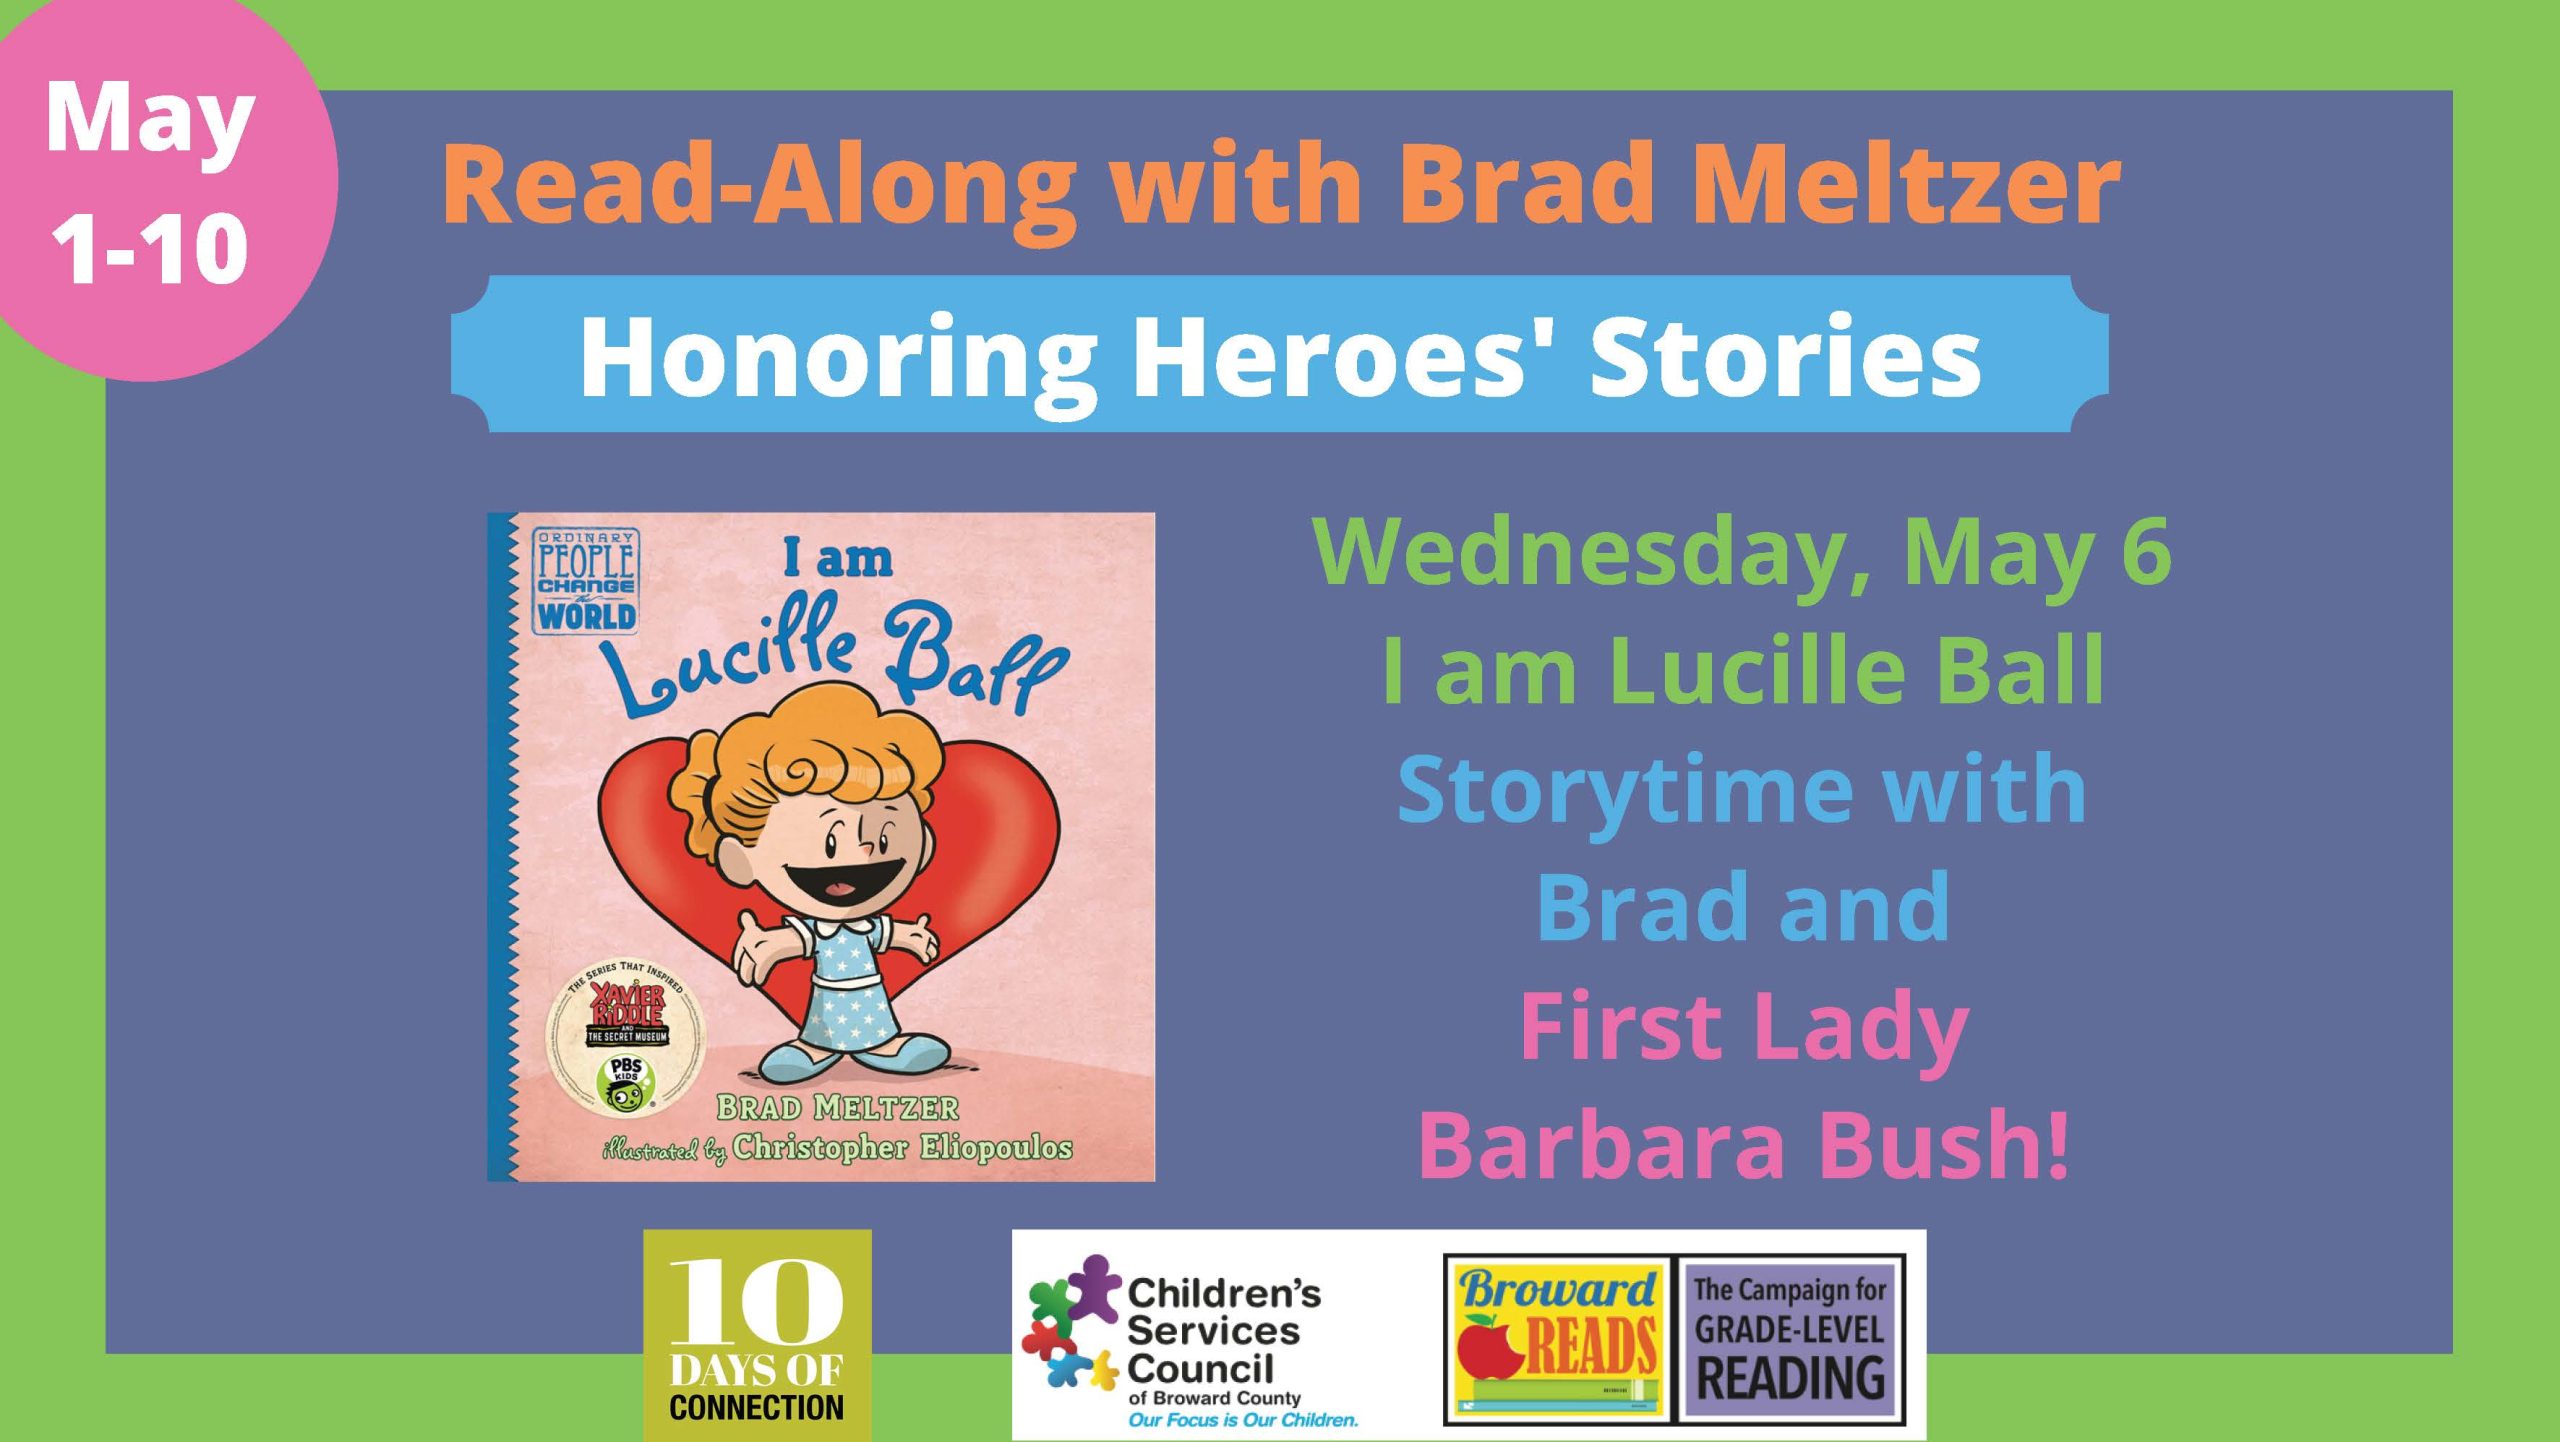 read along with brad meltzer image four